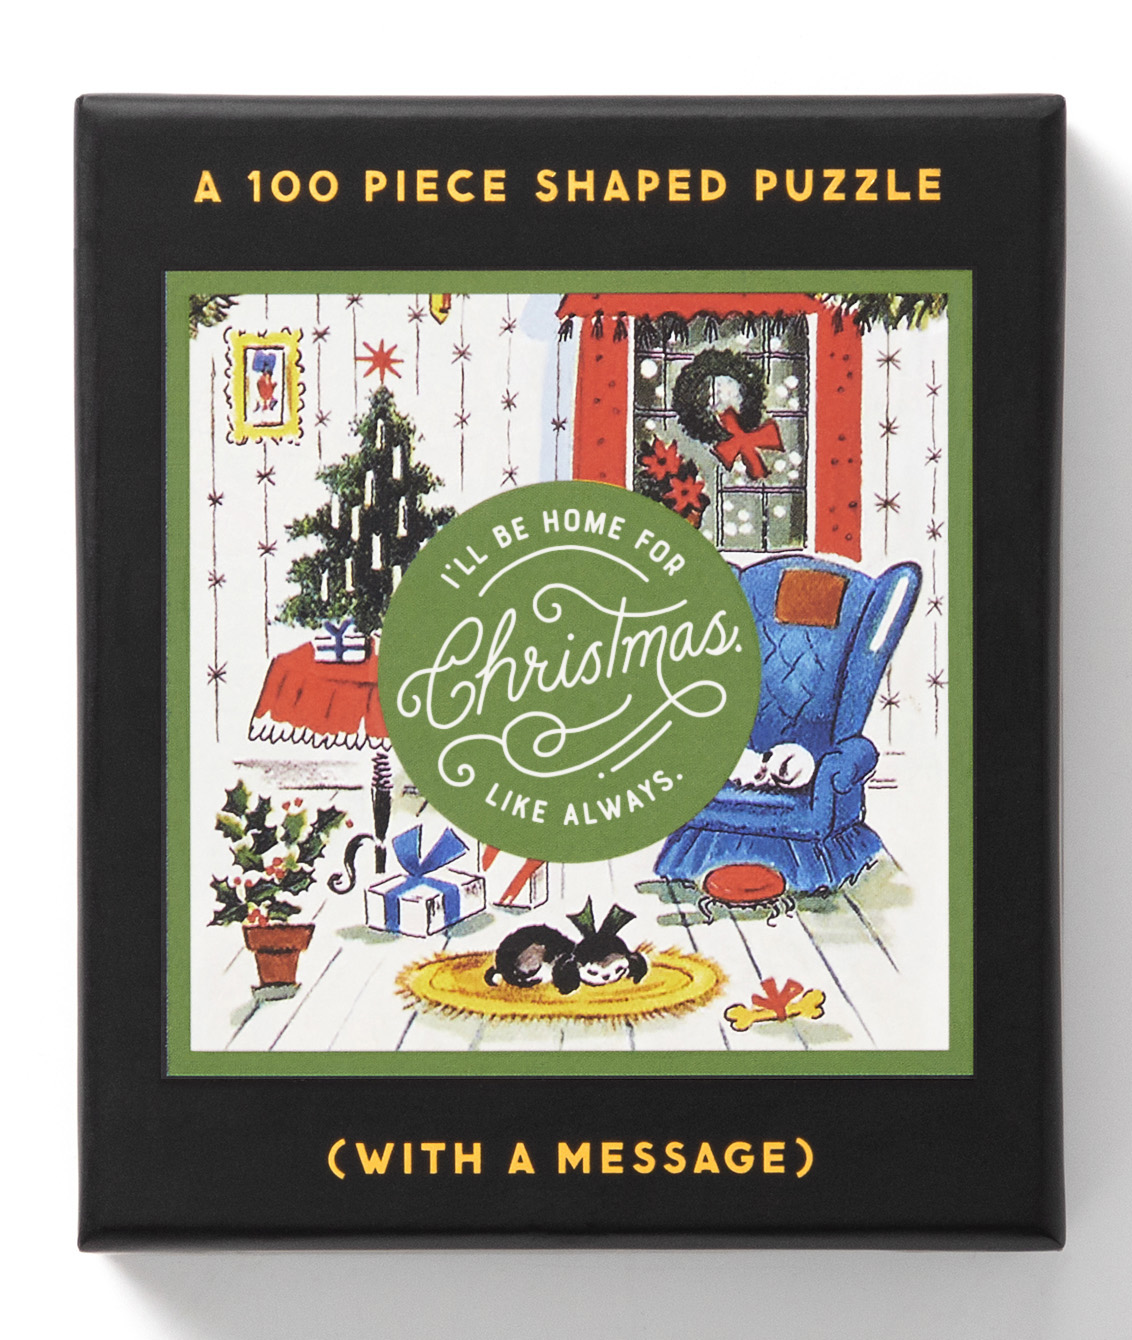 Home for Christmas Mini Shaped Puzzle